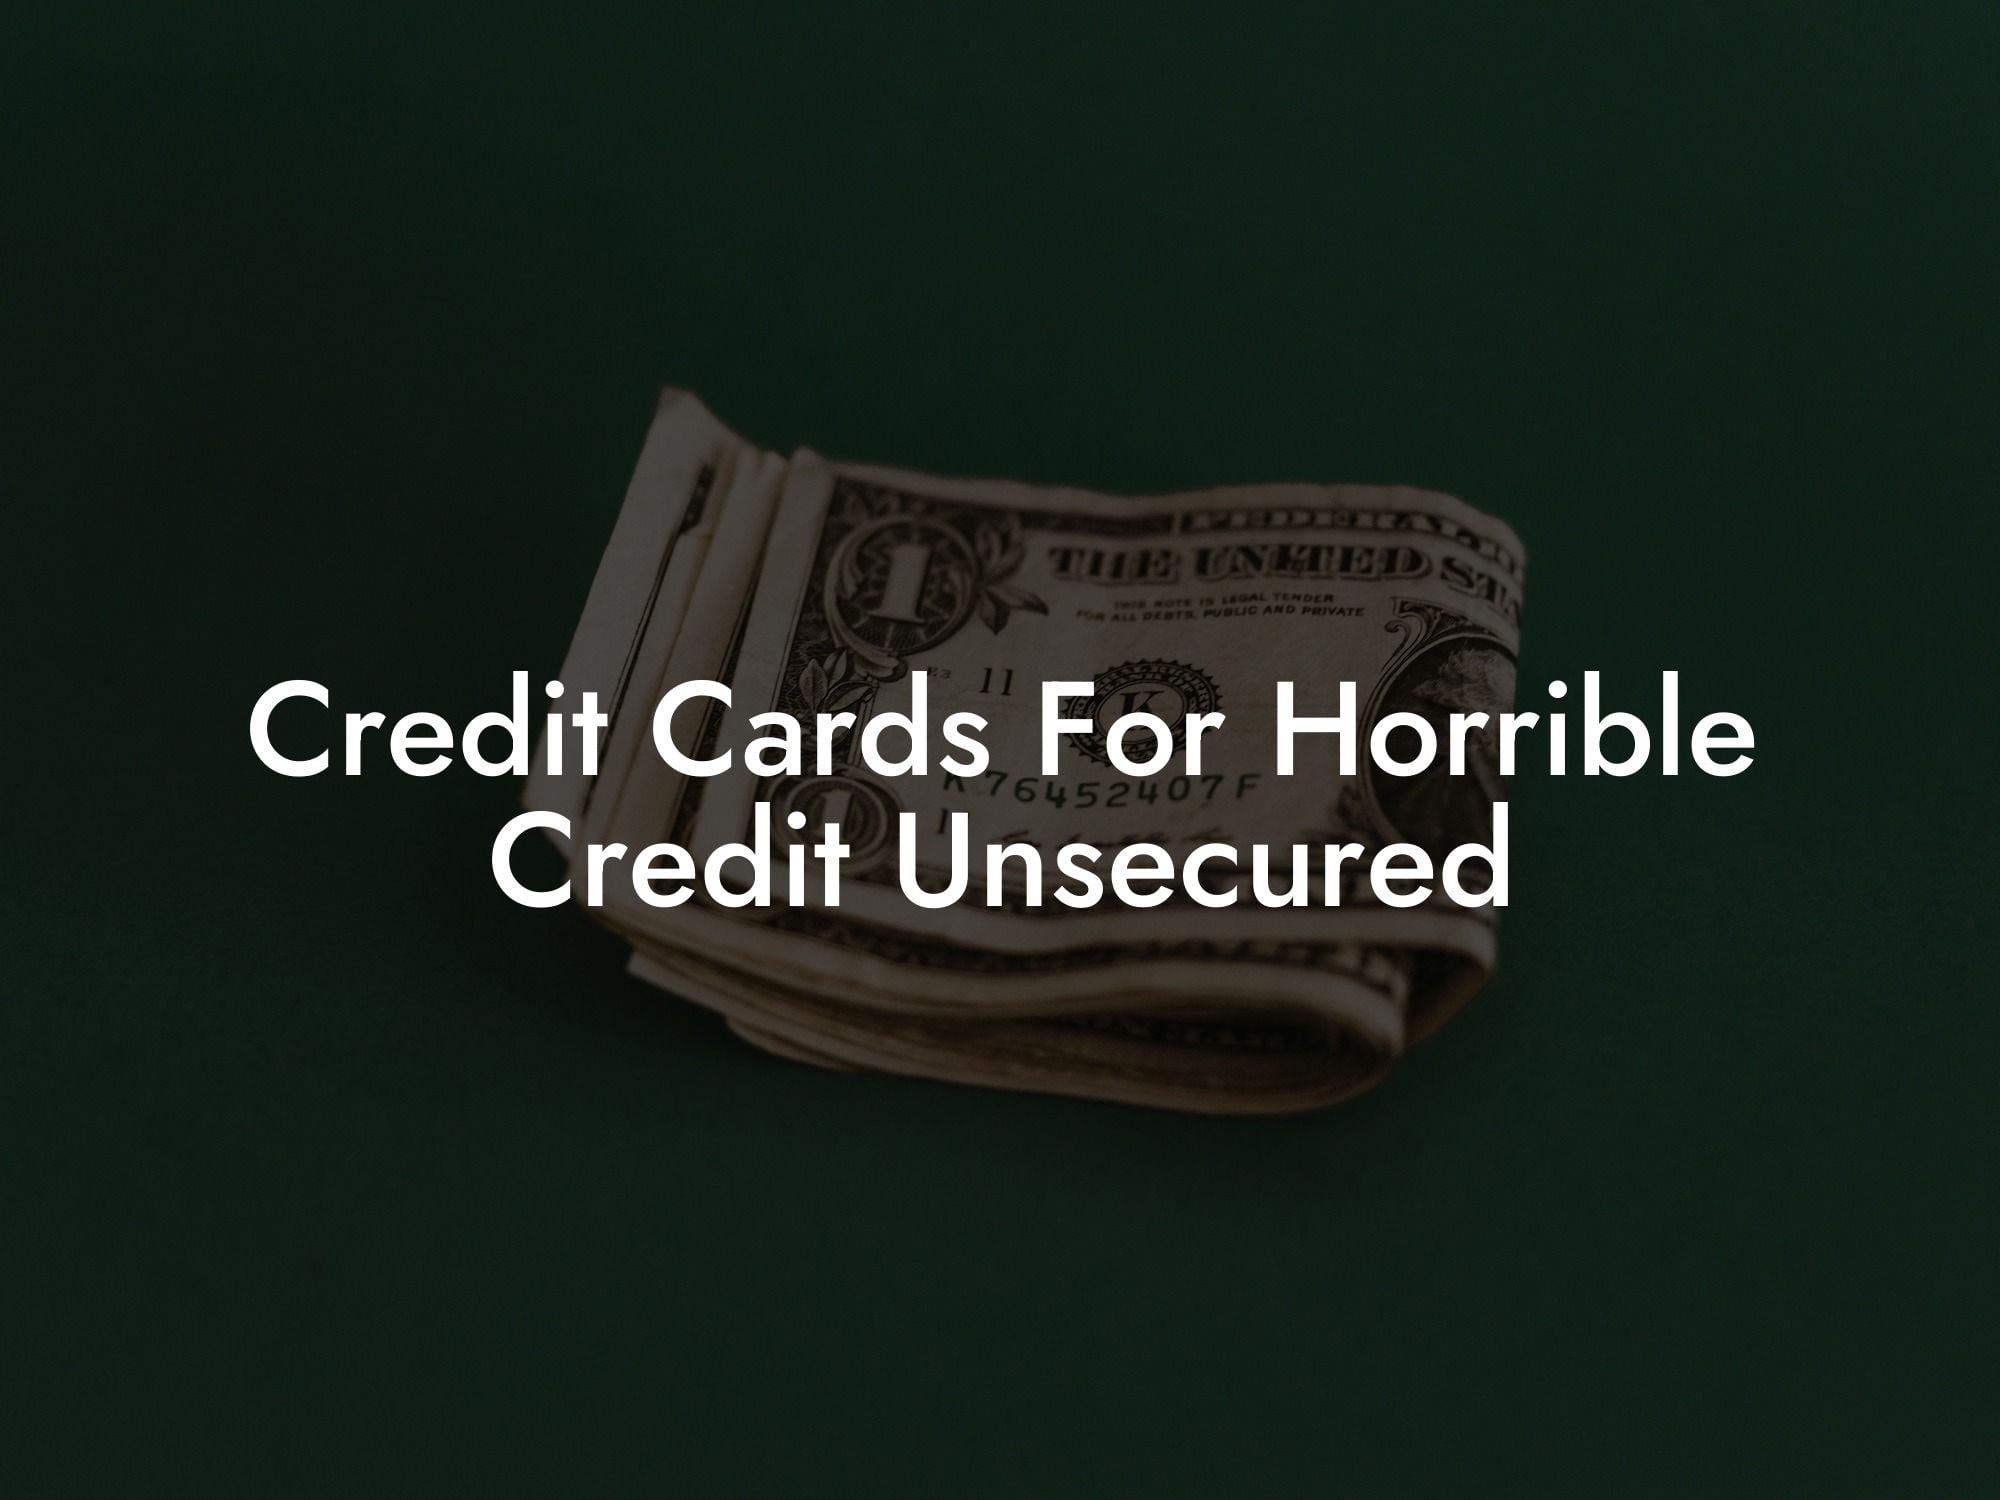 Credit Cards For Horrible Credit Unsecured